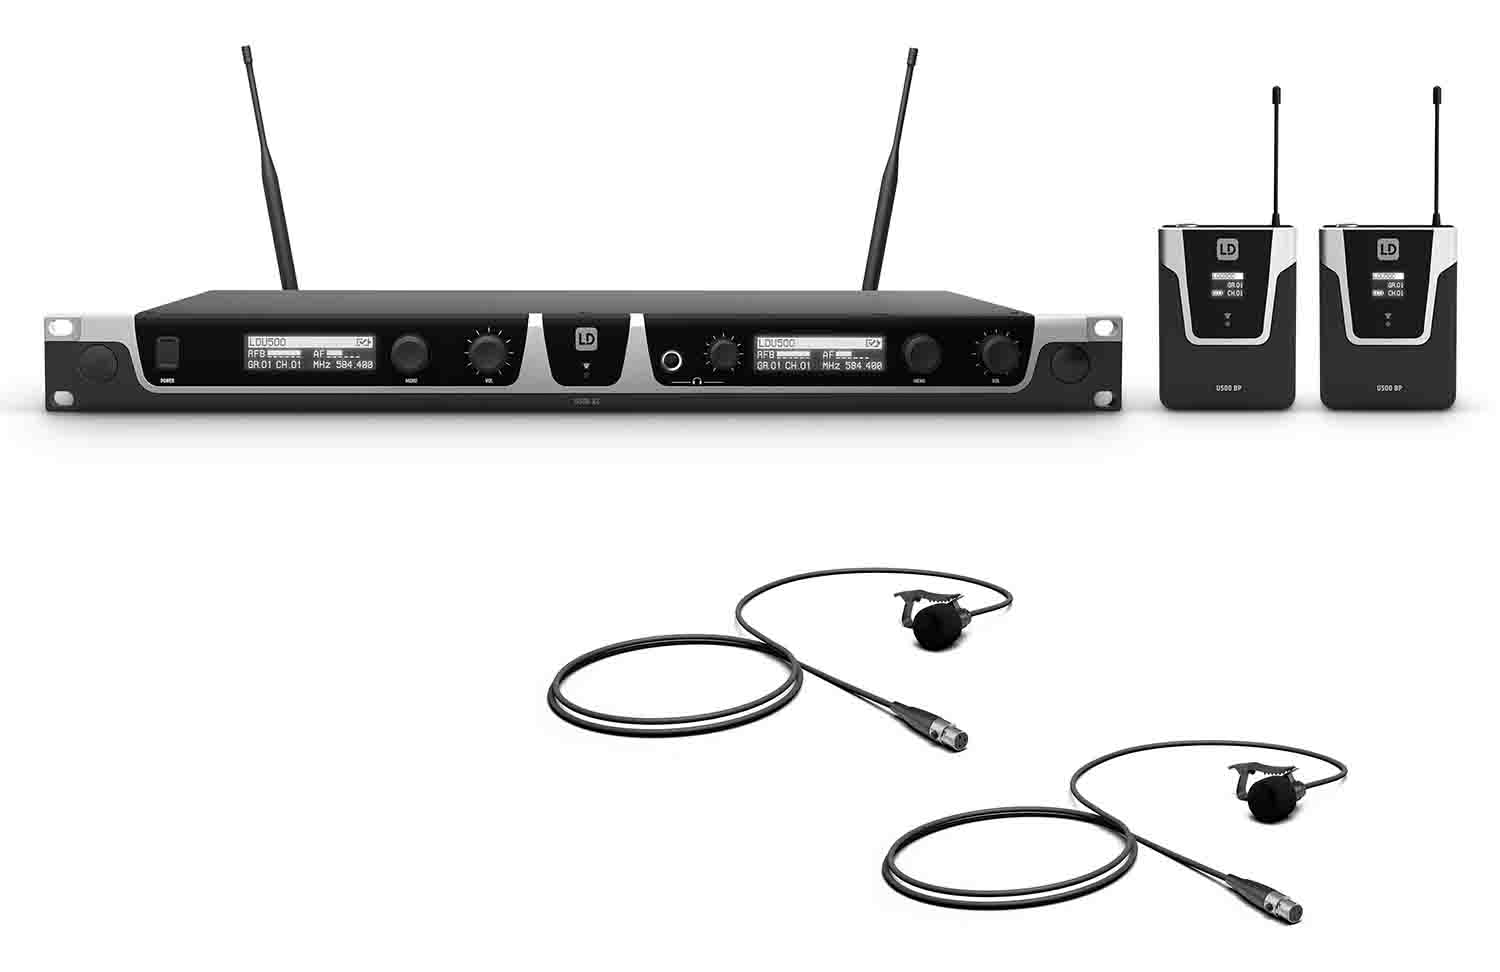 LD Systems U505 BPL 2 Wireless Microphone System with 2 x Bodypack and 2 x Lavalier Microphone - Hollywood DJ